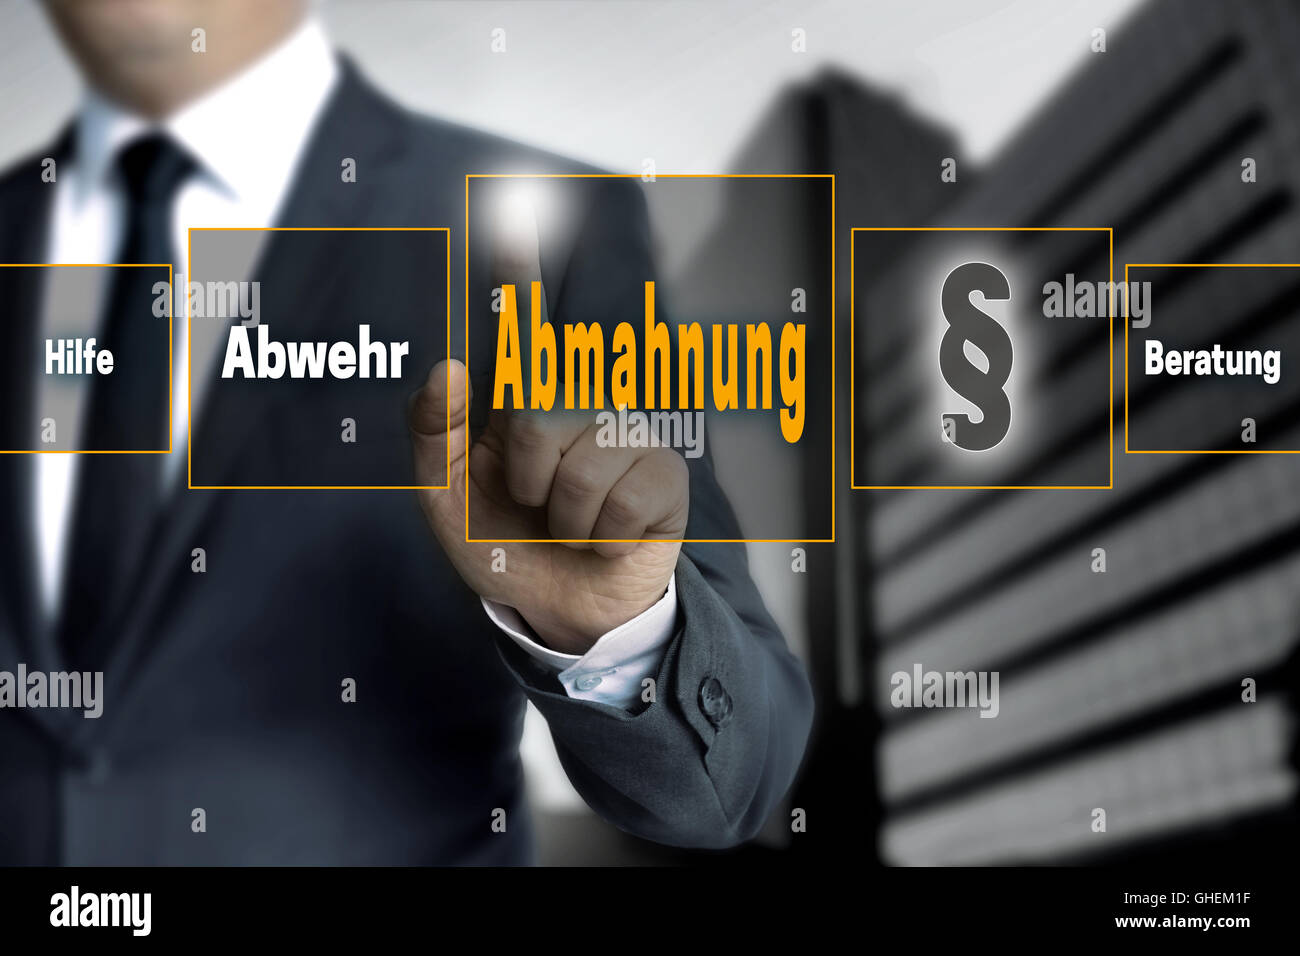 Abmahnung (in german warning, help, defense; advice) touchscreen is operated by businessman. Stock Photo